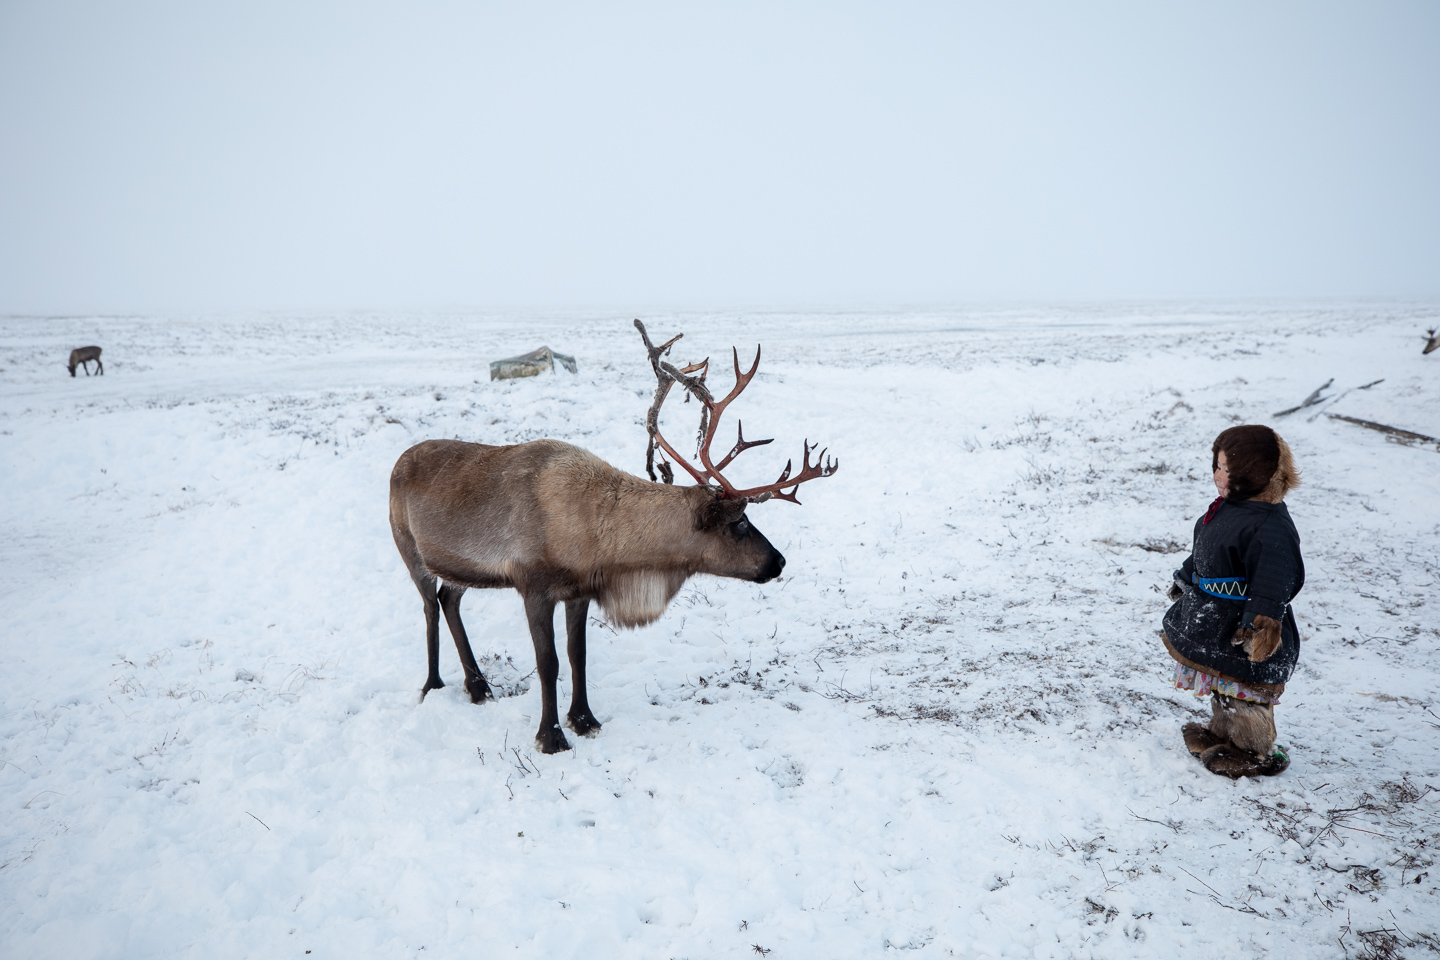 Reindeer herding is central to the identity of many indigenous communities in the North.